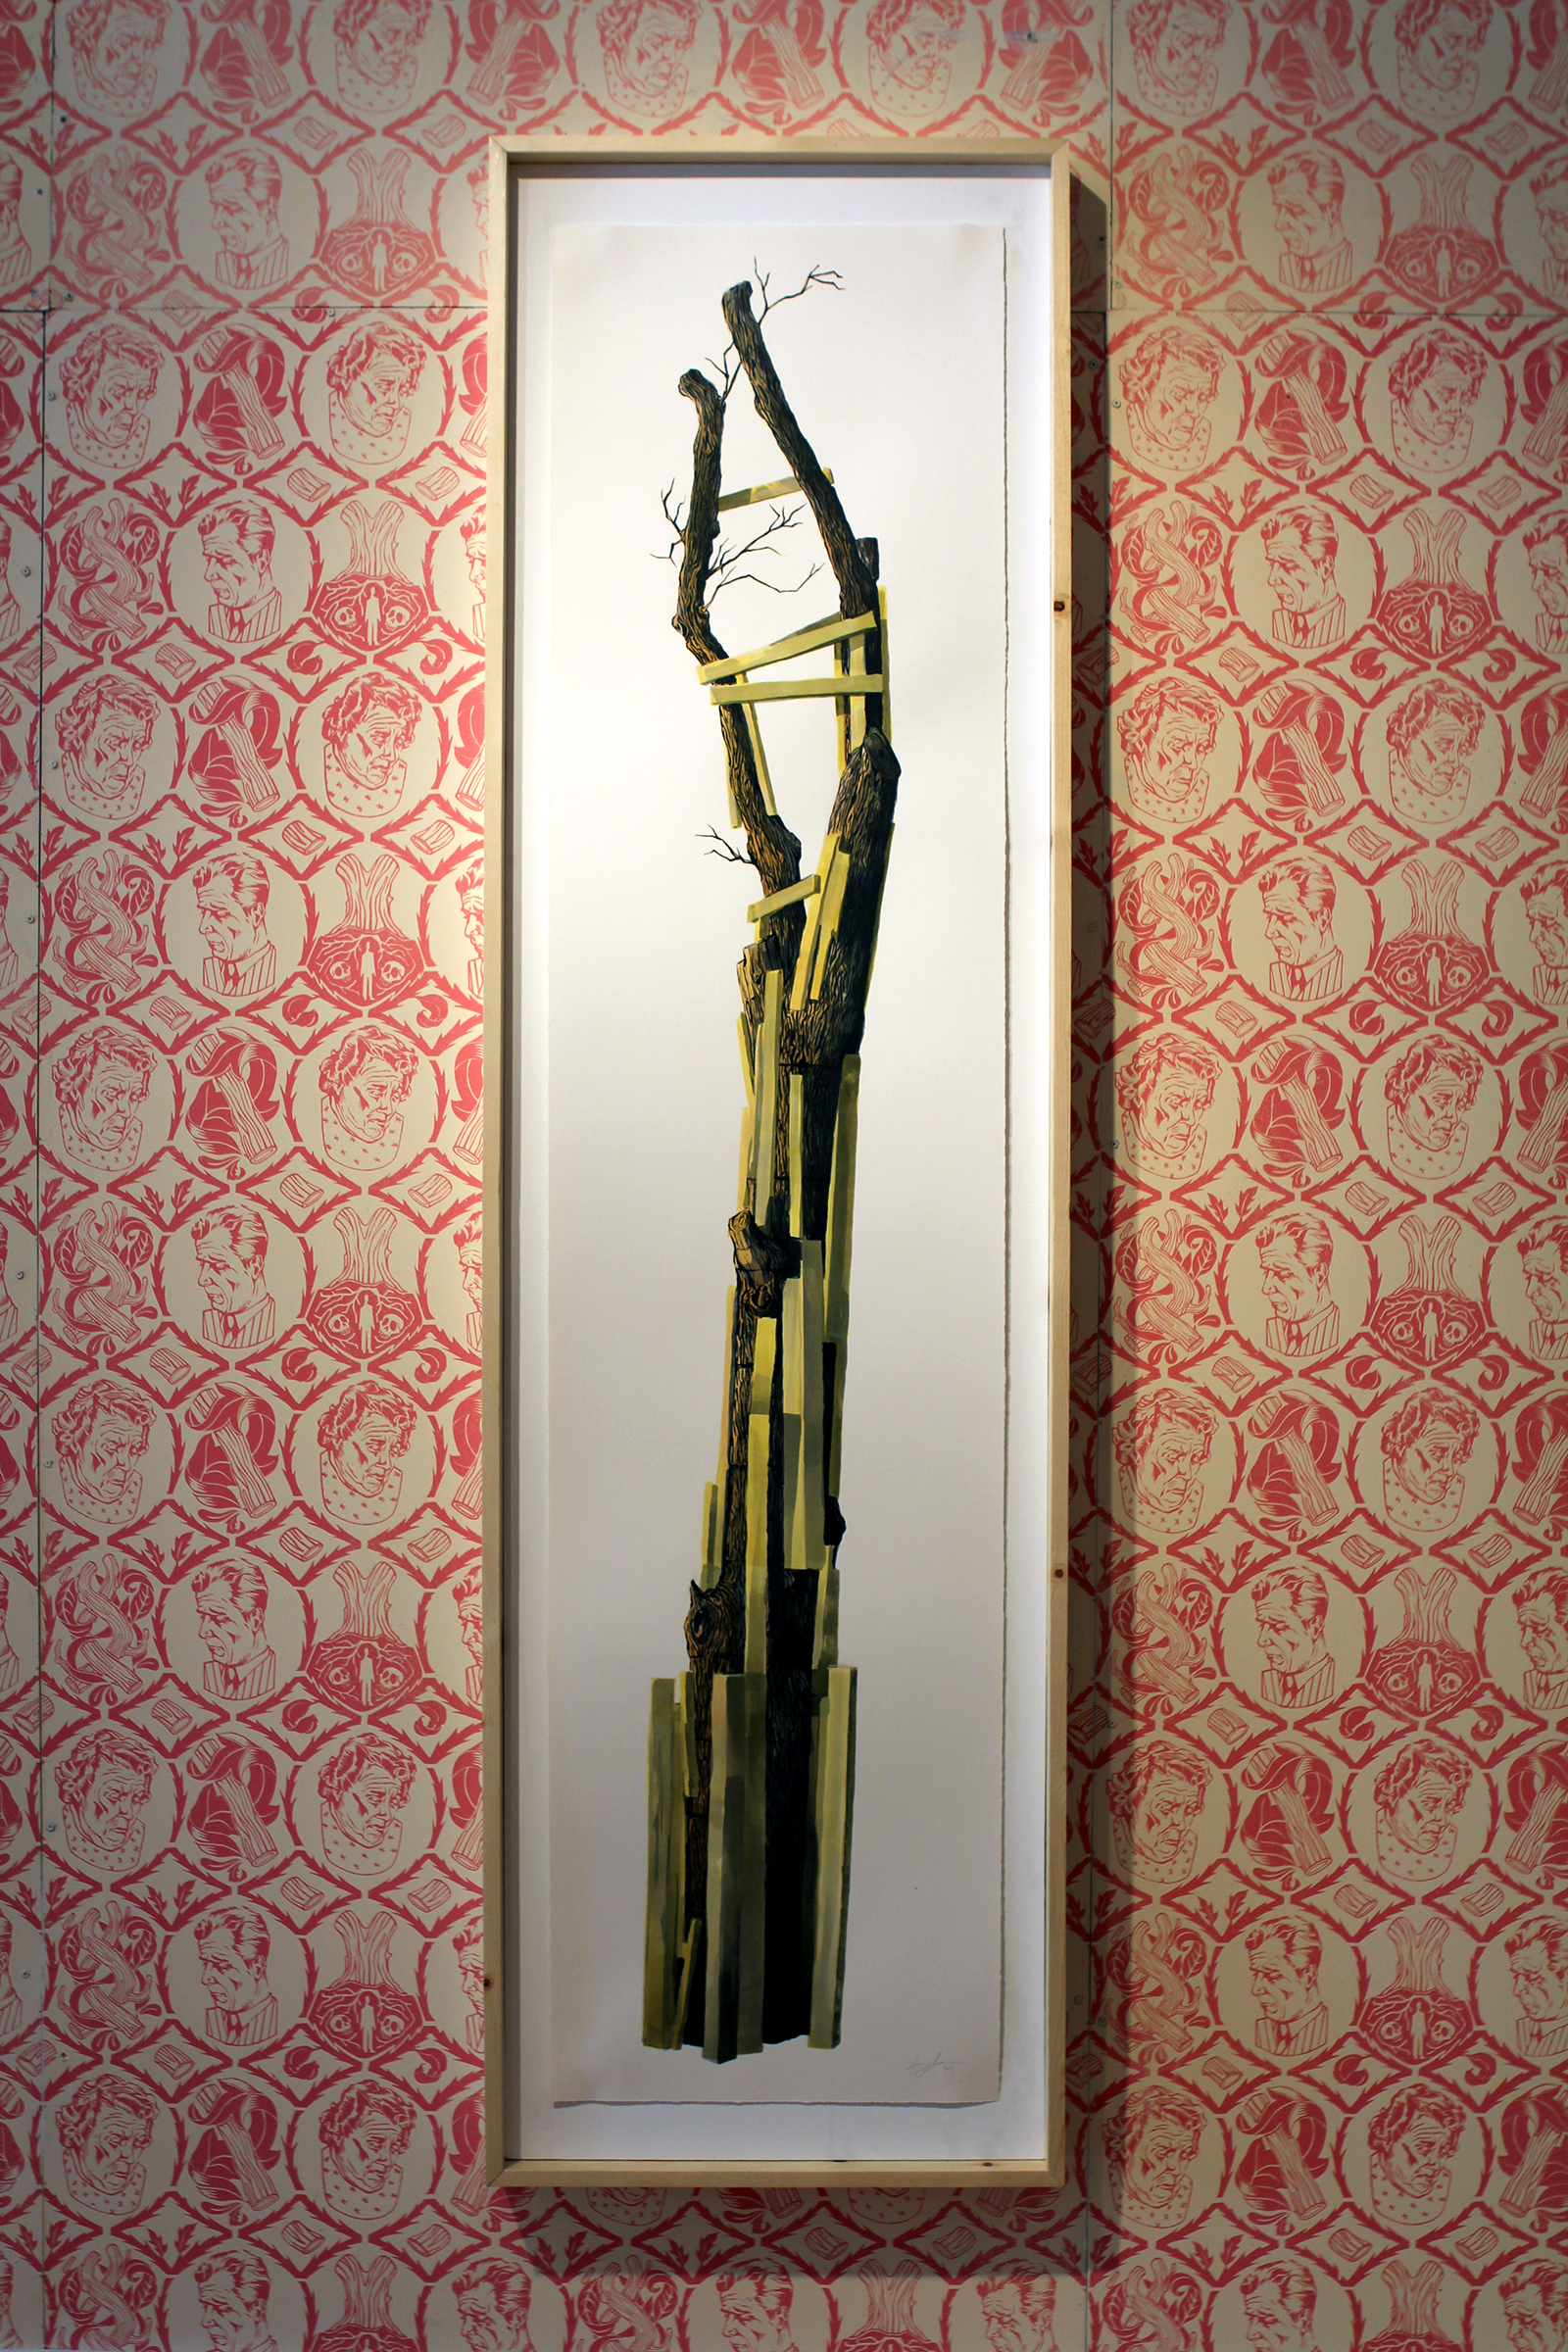 A photograph of a painting of a tree sculpture hanging in a gallery with pink patterned wallpaper